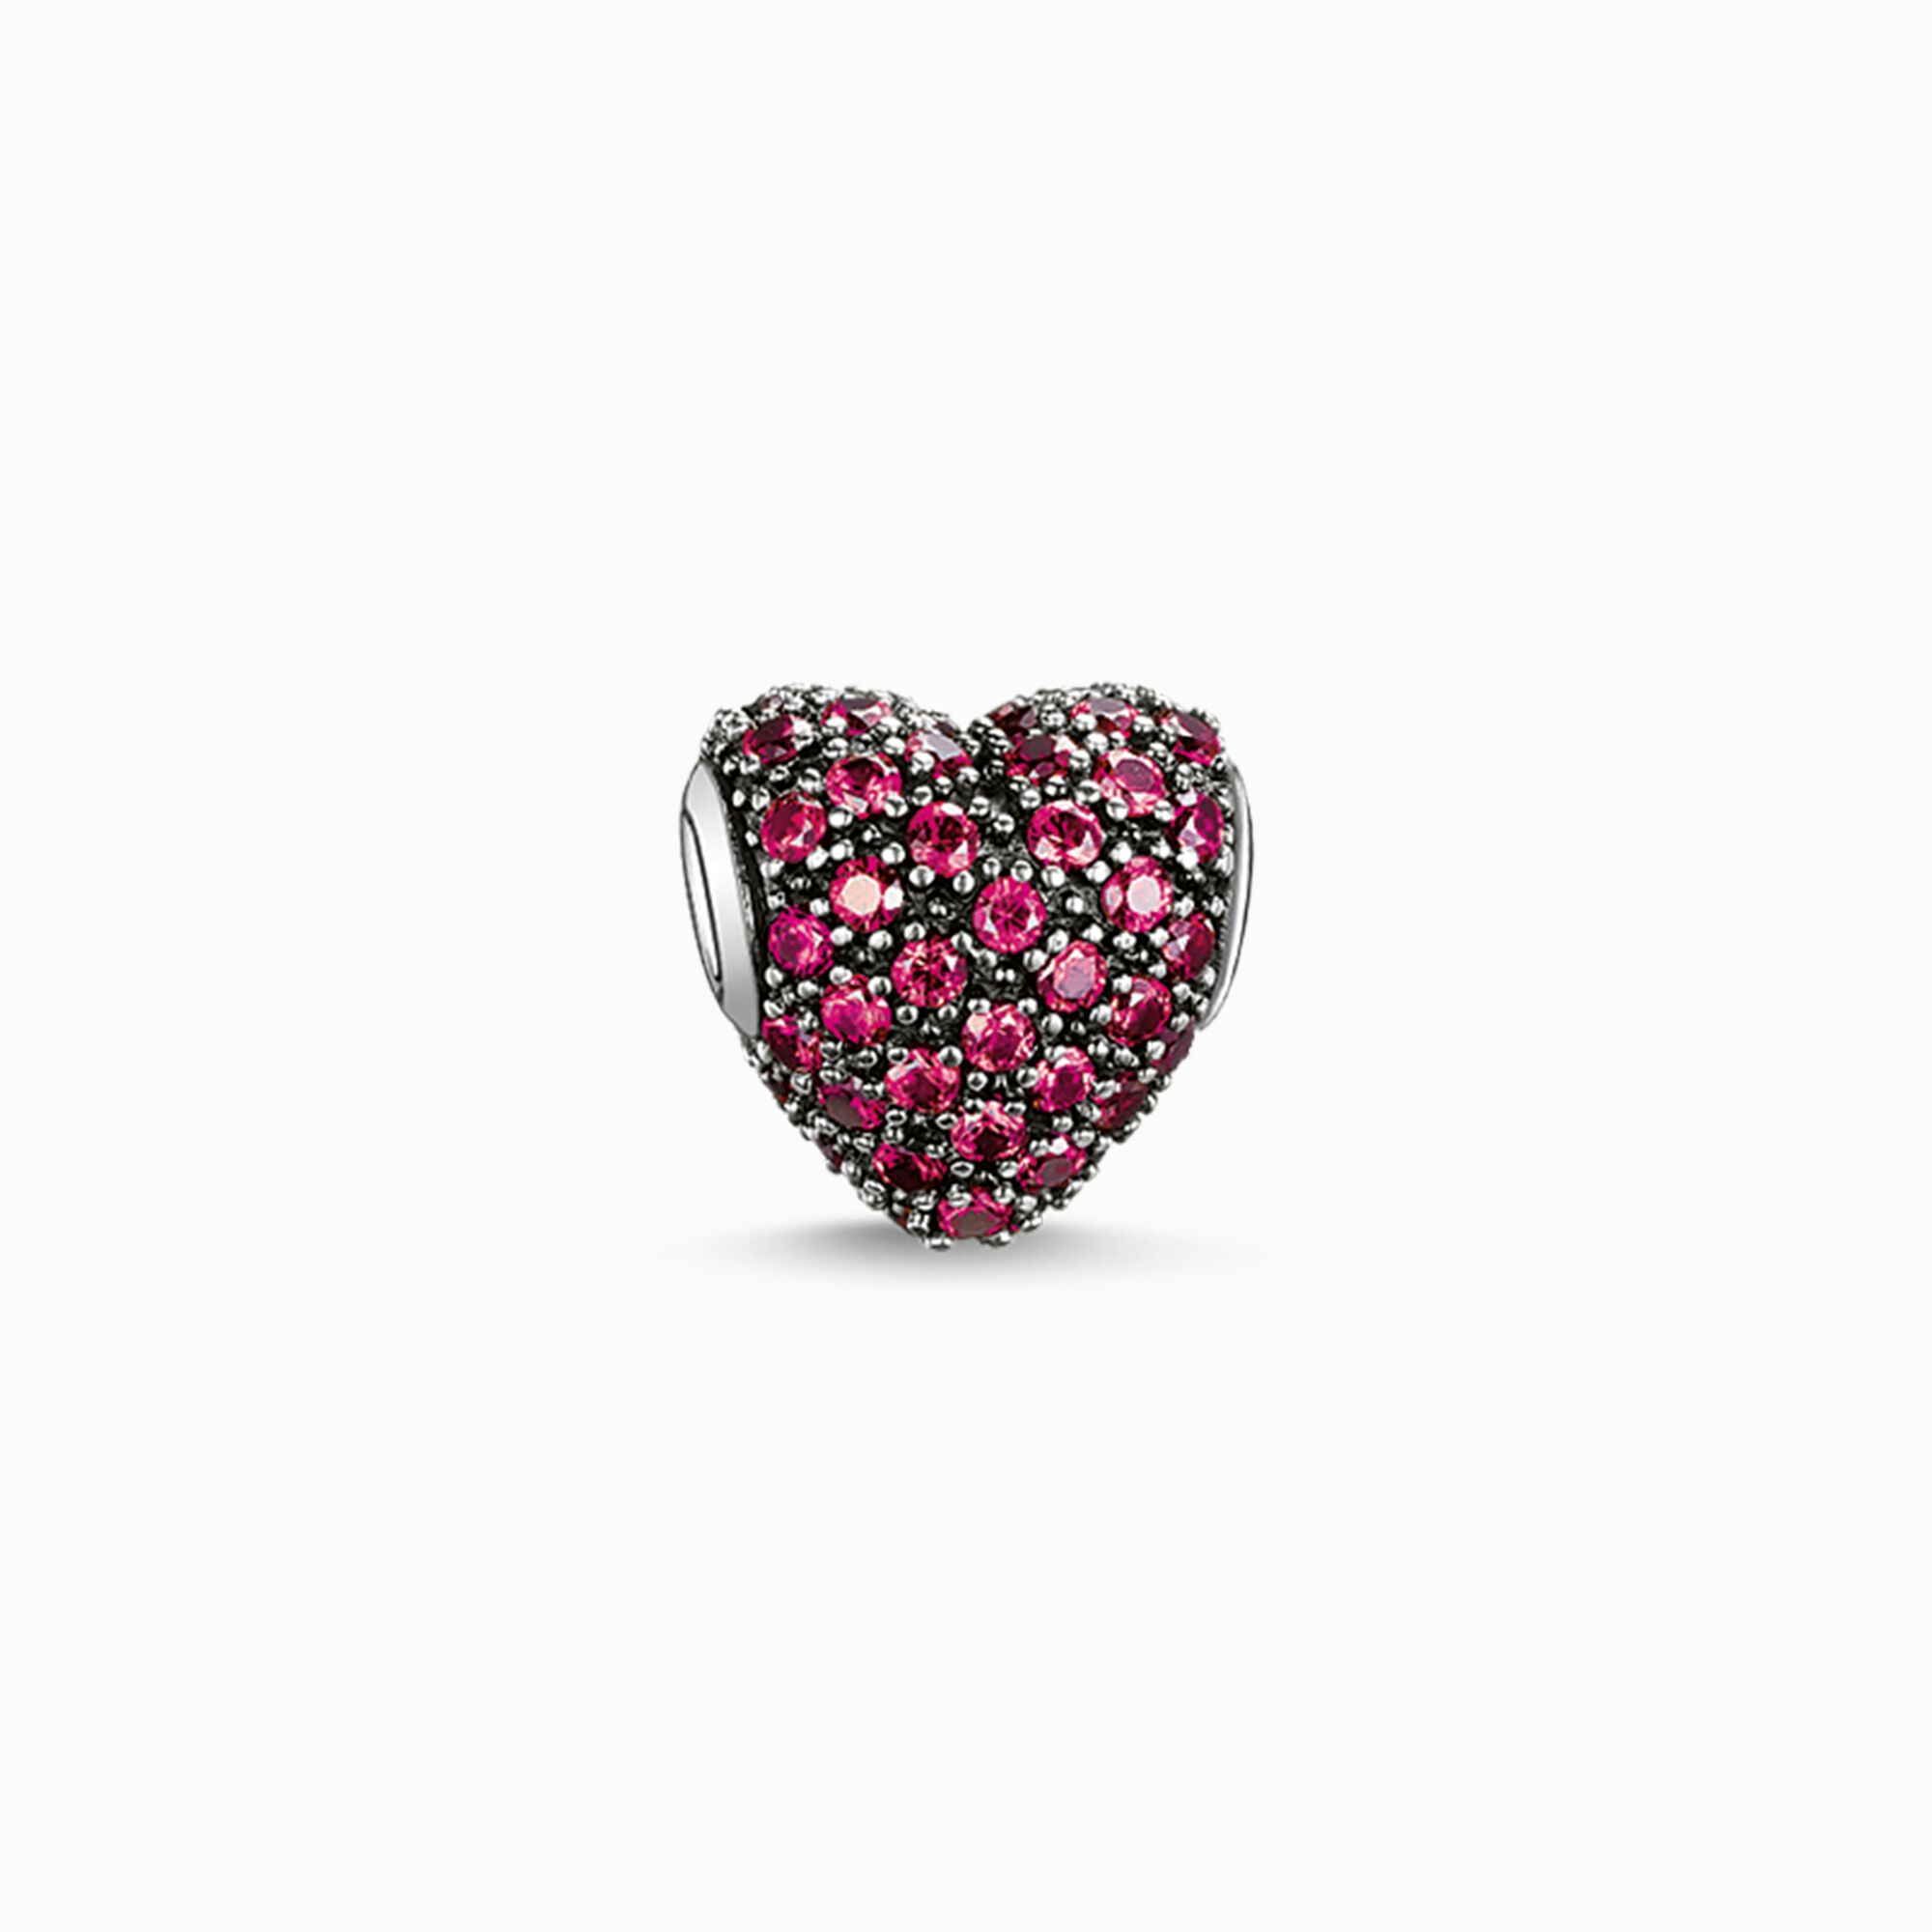 Bead red pav&eacute; heart from the Karma Beads collection in the THOMAS SABO online store